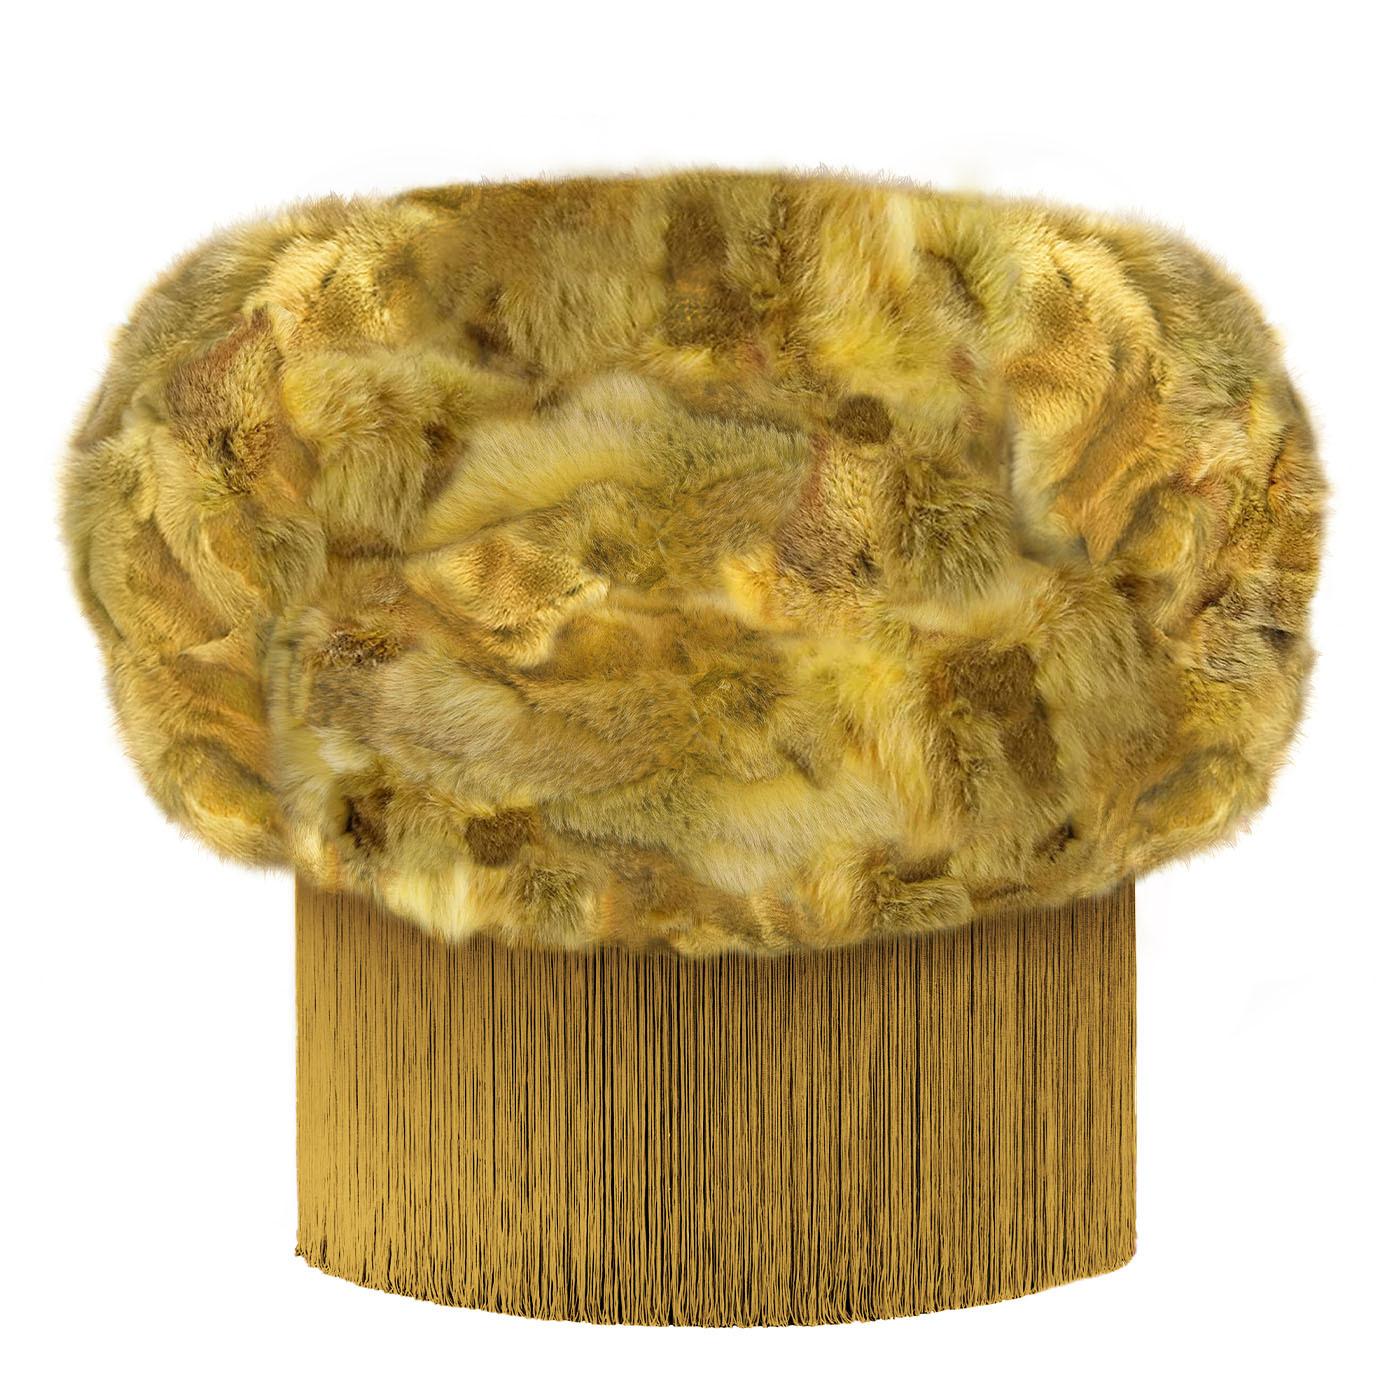 Lorenza Bozzoli Couture presents a limited-edition collection characterized by an extremely soft design, eclectic and distinctly retro. The new Fur Collection offers the Couture iconic pieces in a furry version with colours inspired by the seventies